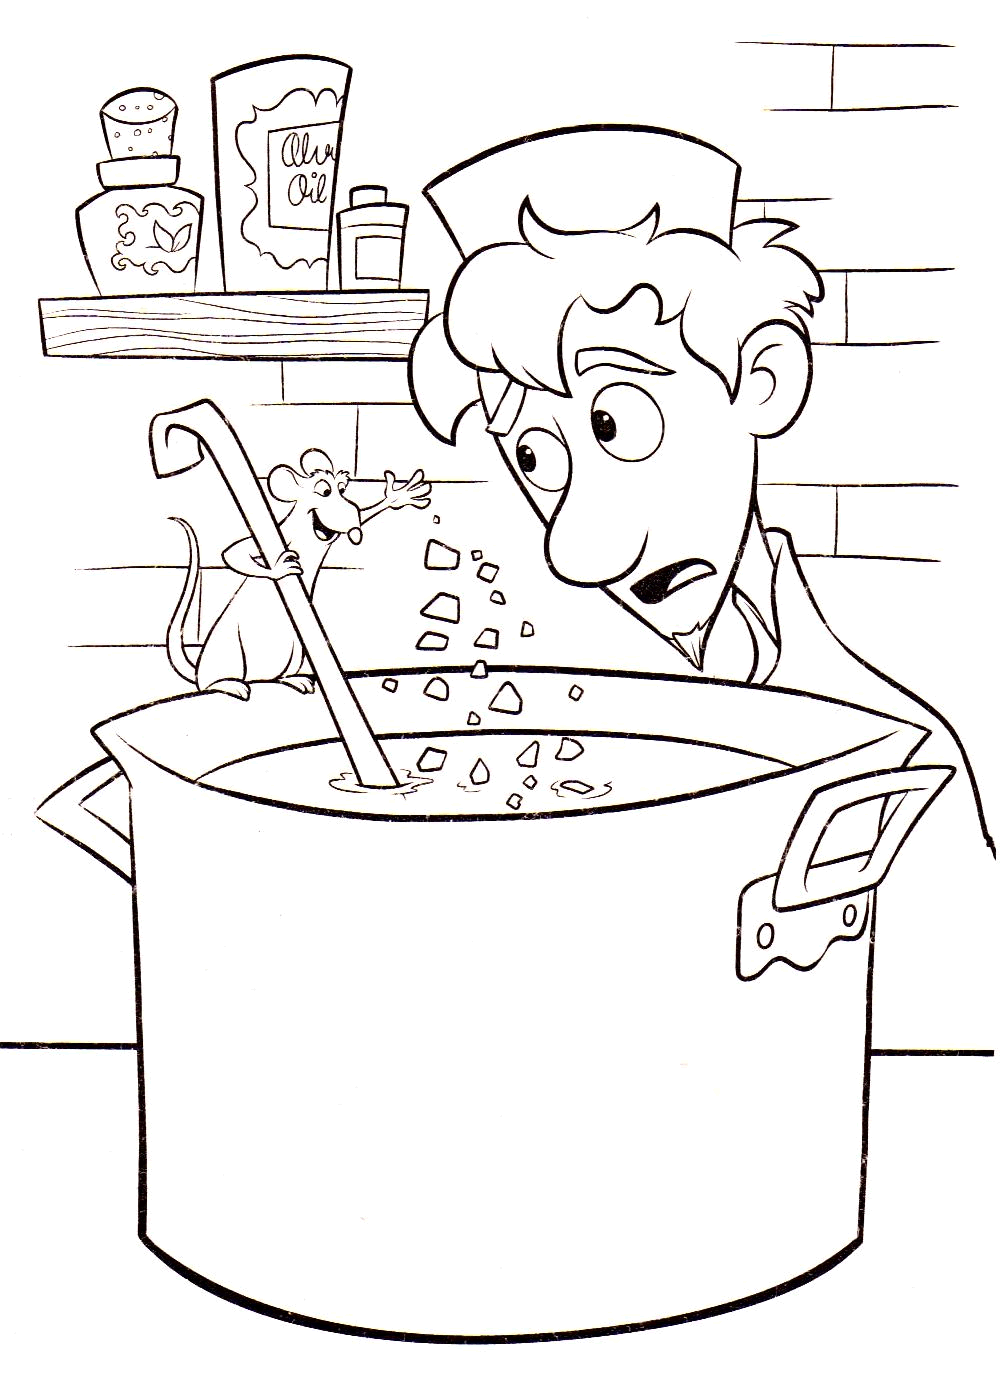 7700 Disney Ratatouille Coloring Pages Download Free Images - Hot